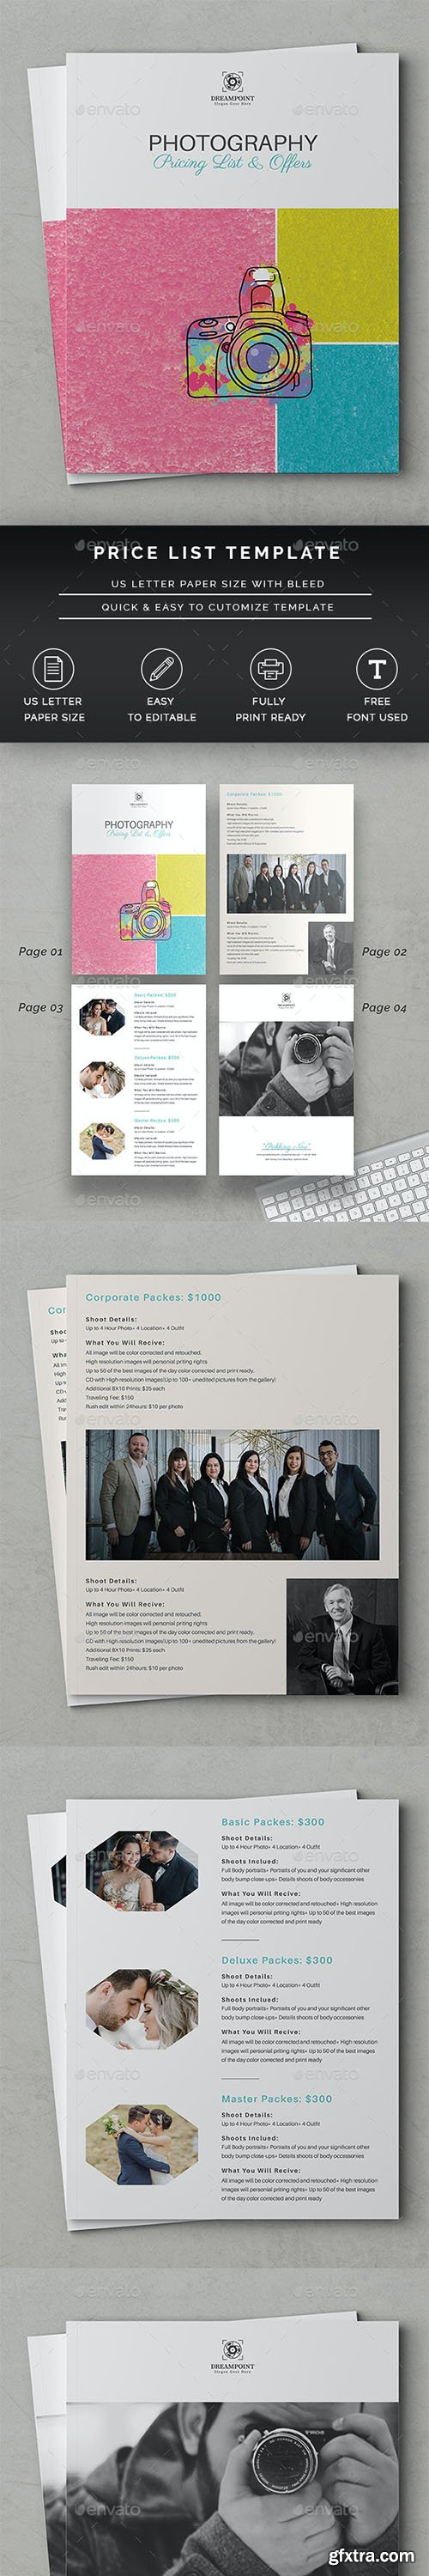 GraphicRiver - Photography Price List Template 26680958